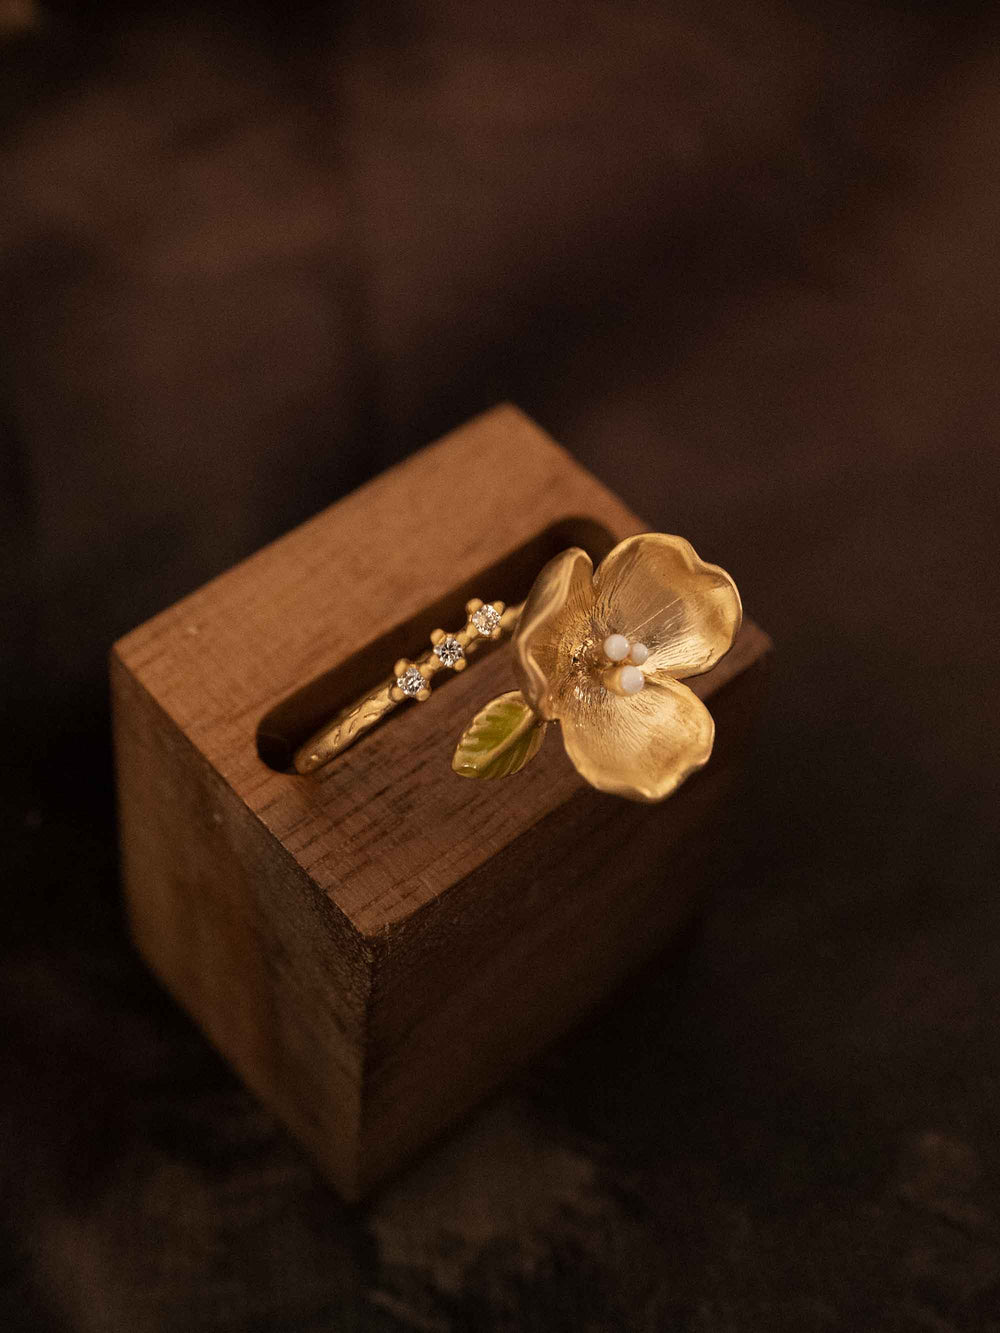 One gold flower and zirconia ring